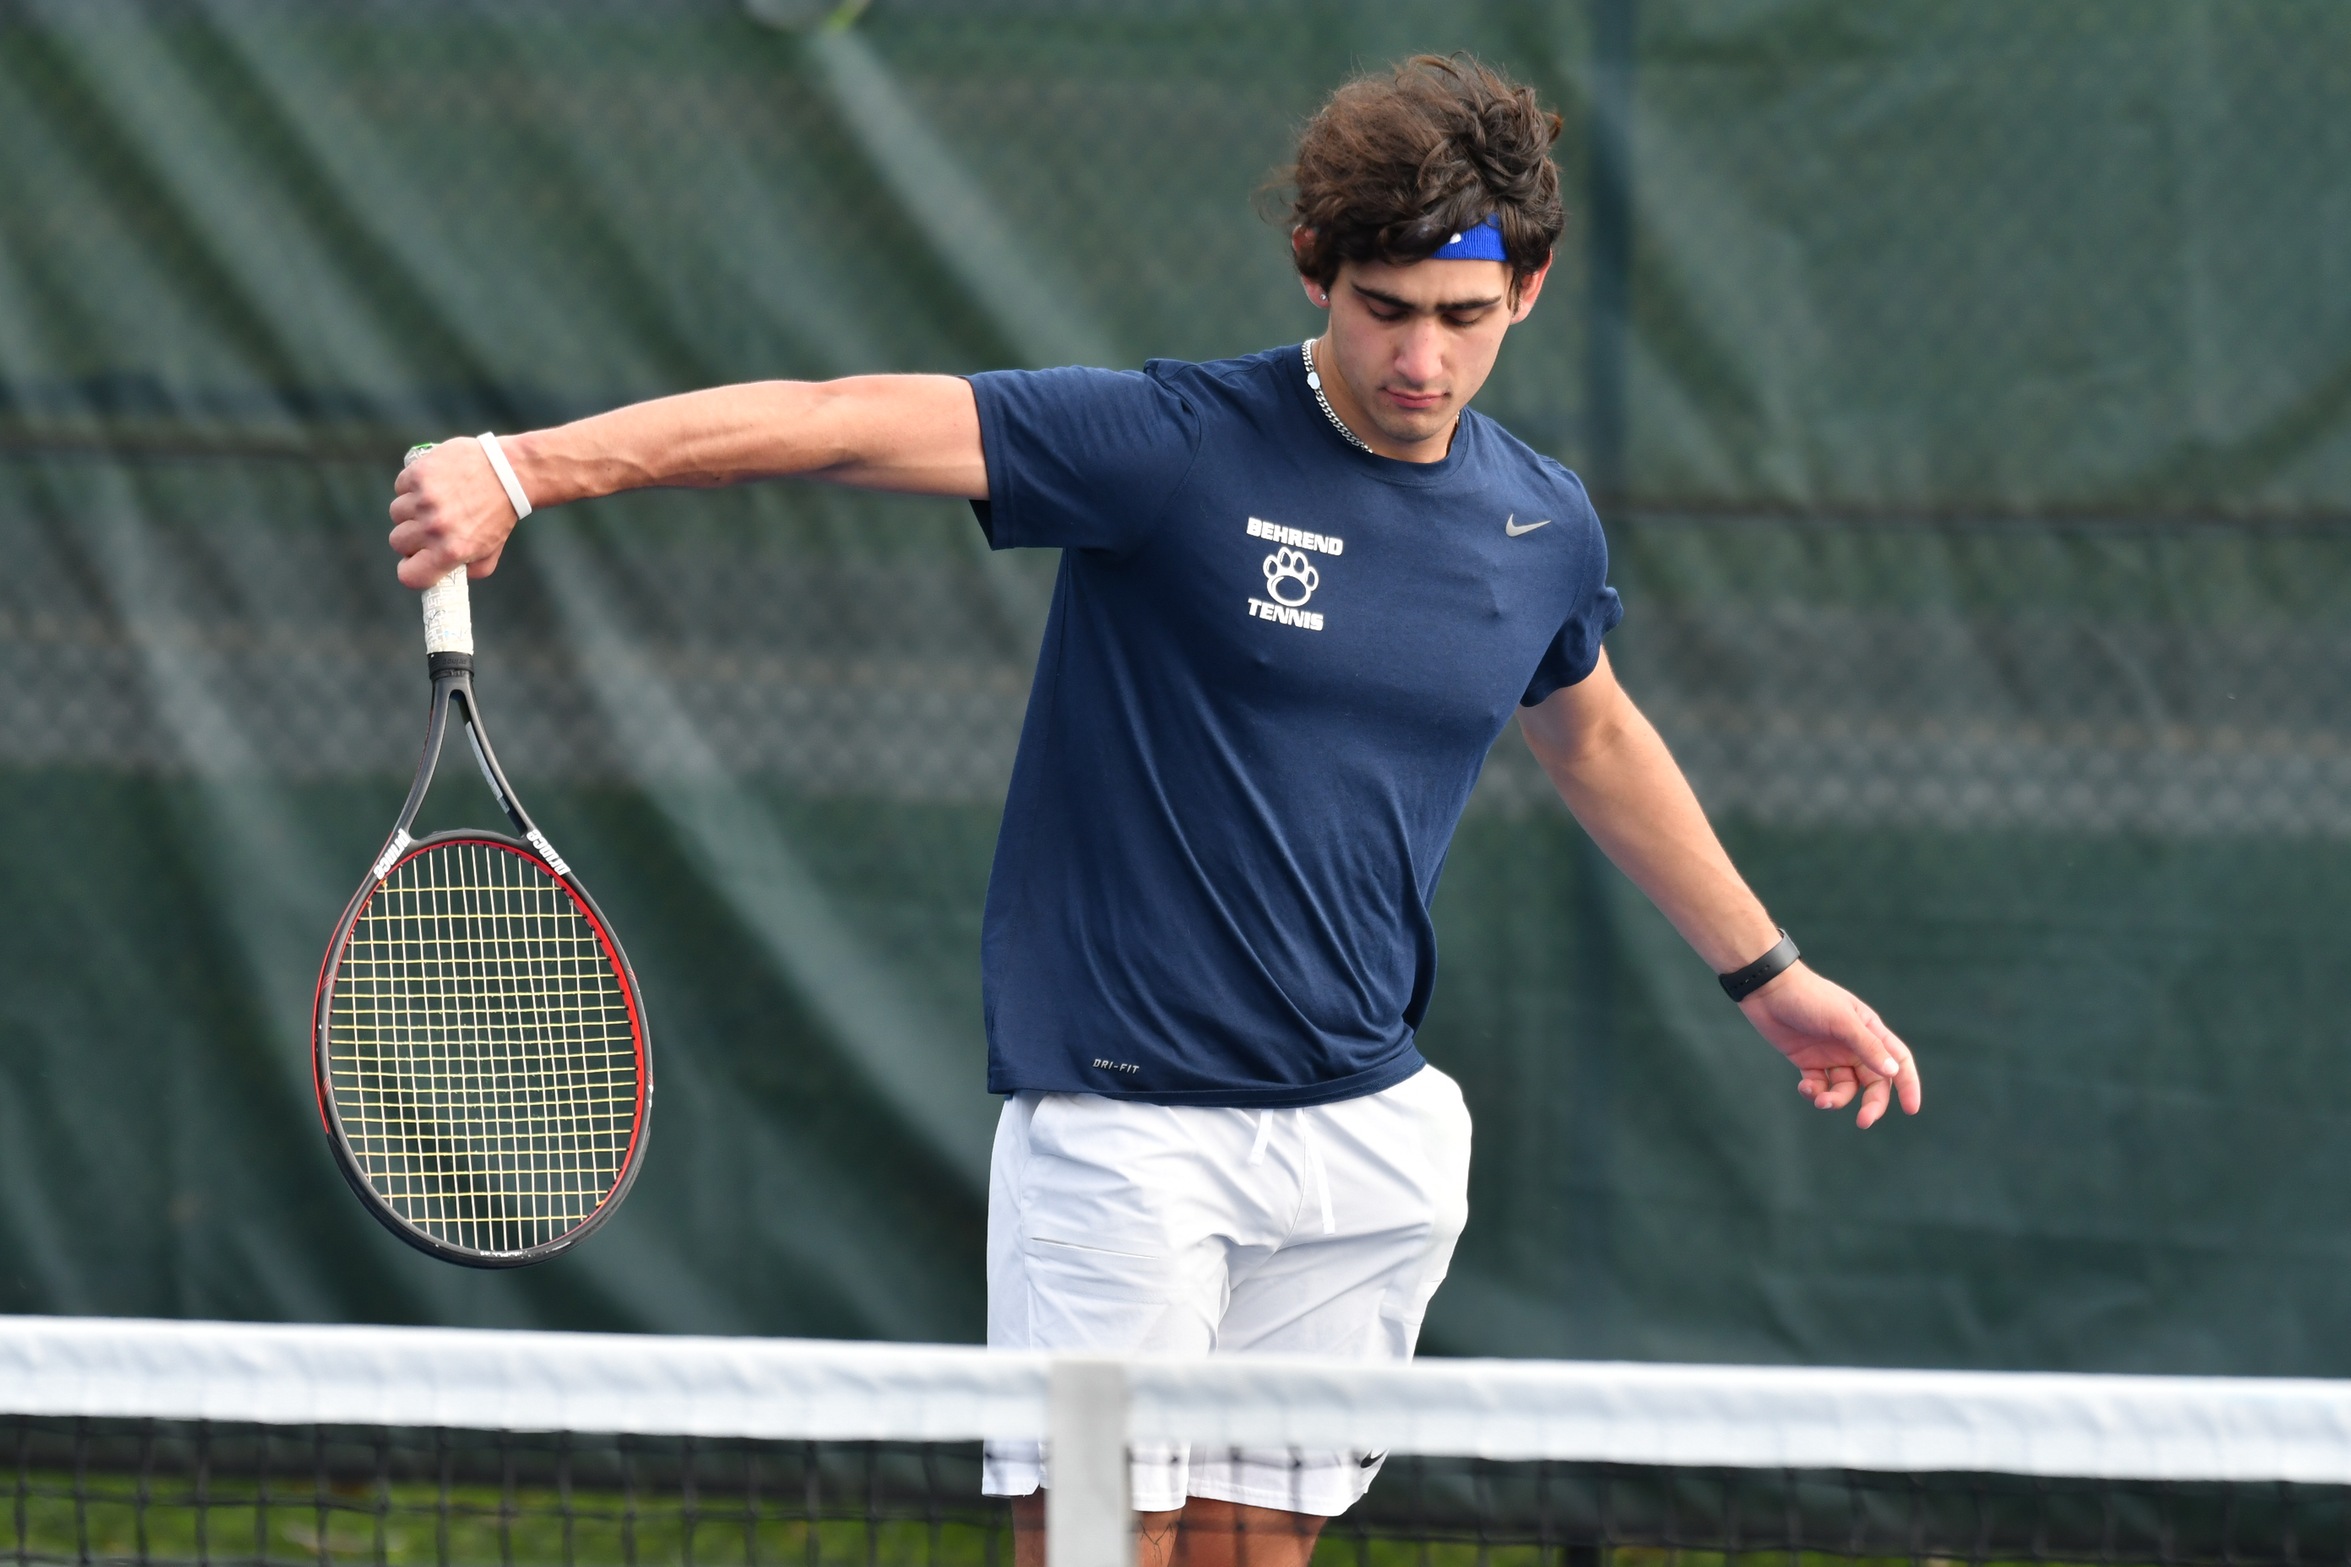 Nadikude Wins Twice For Behrend Men's Tennis; Lions Fall to Otterbein